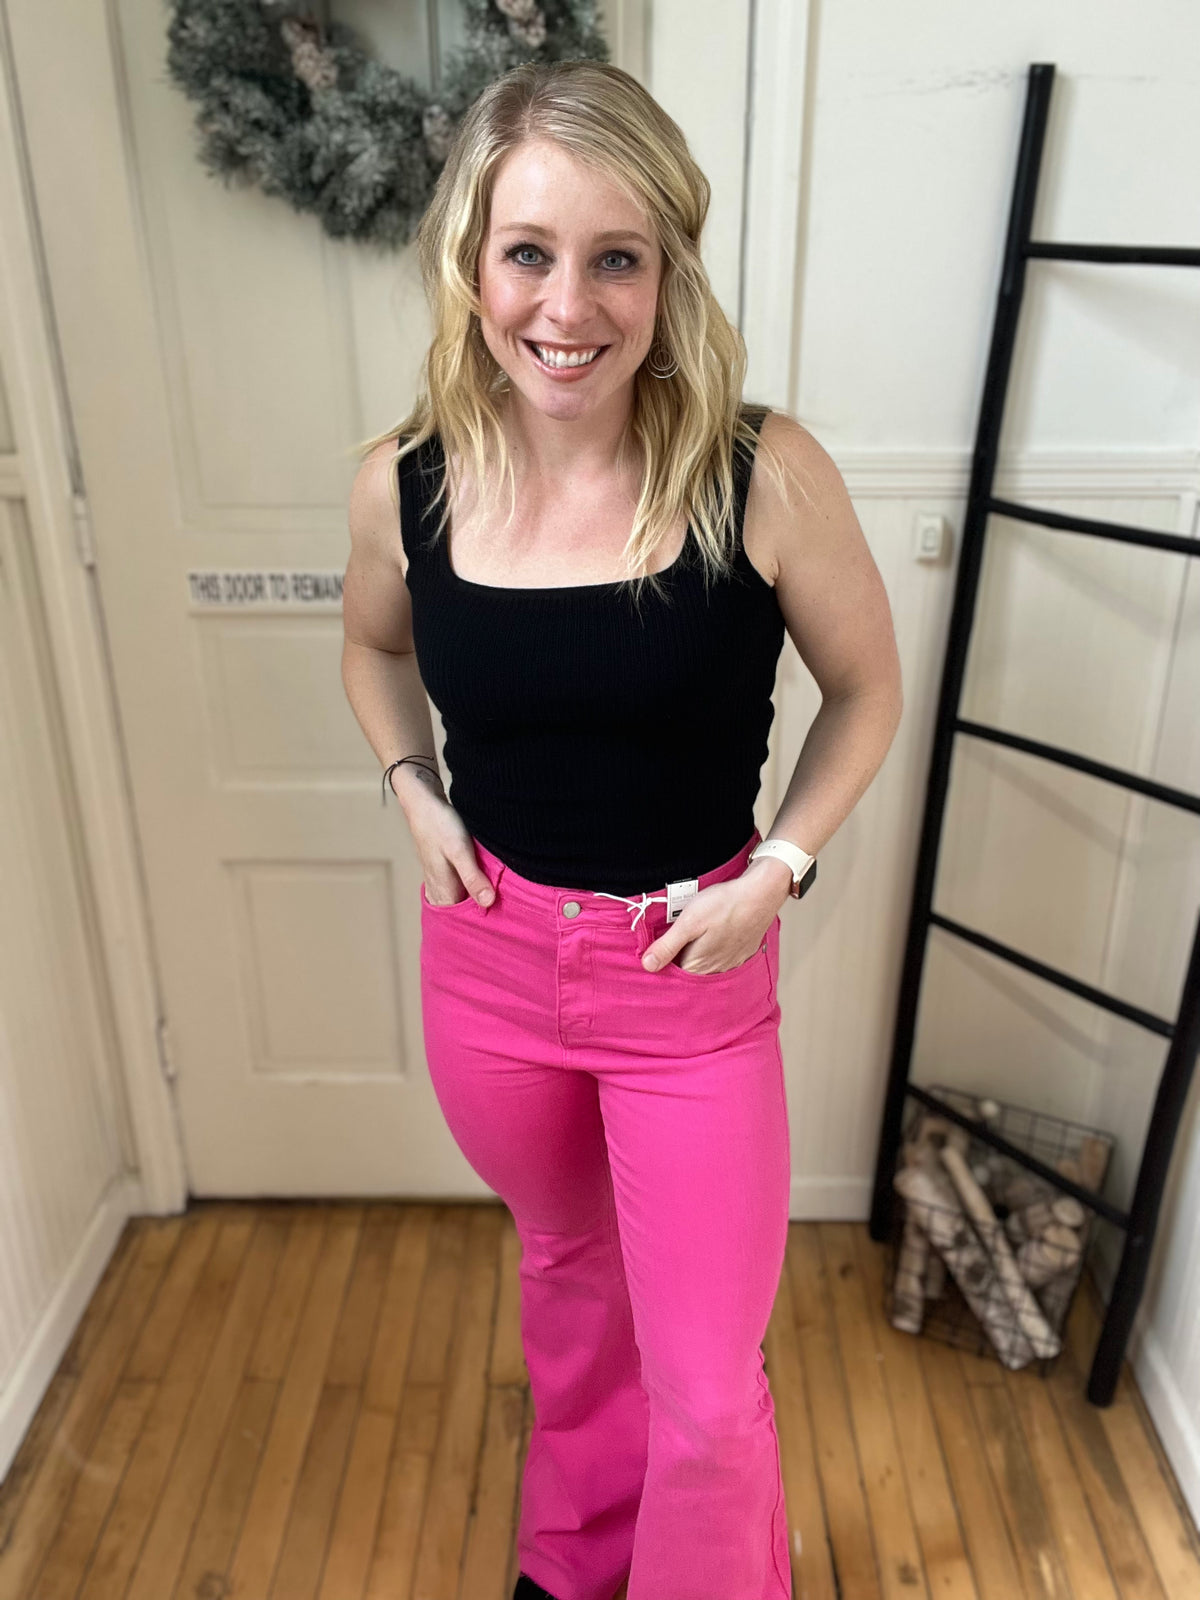 Hot Pink JB Flare Jeans